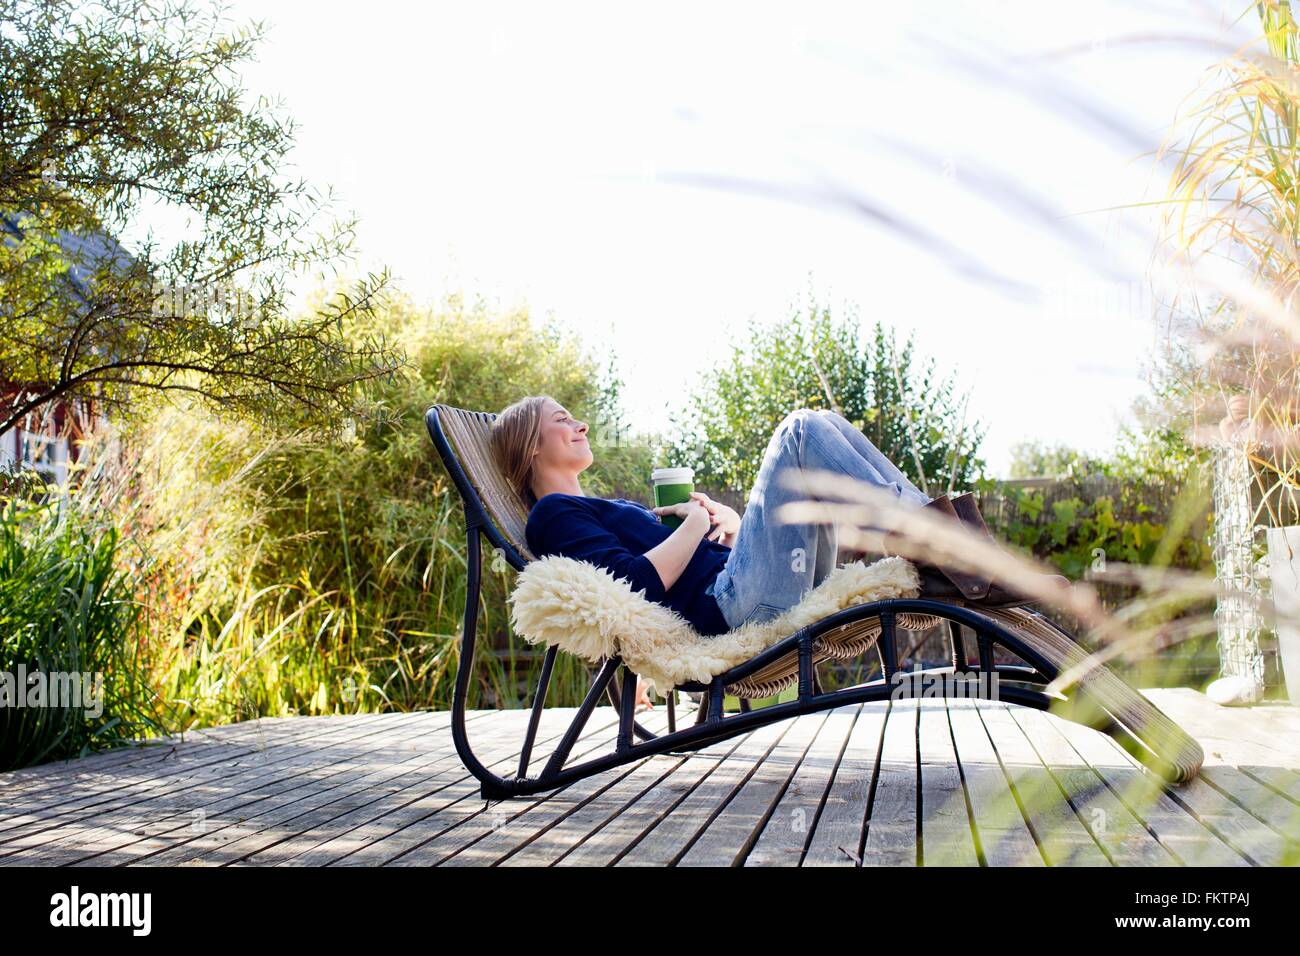 Mid adult woman relaxing on lounge chair on decking en bois Banque D'Images